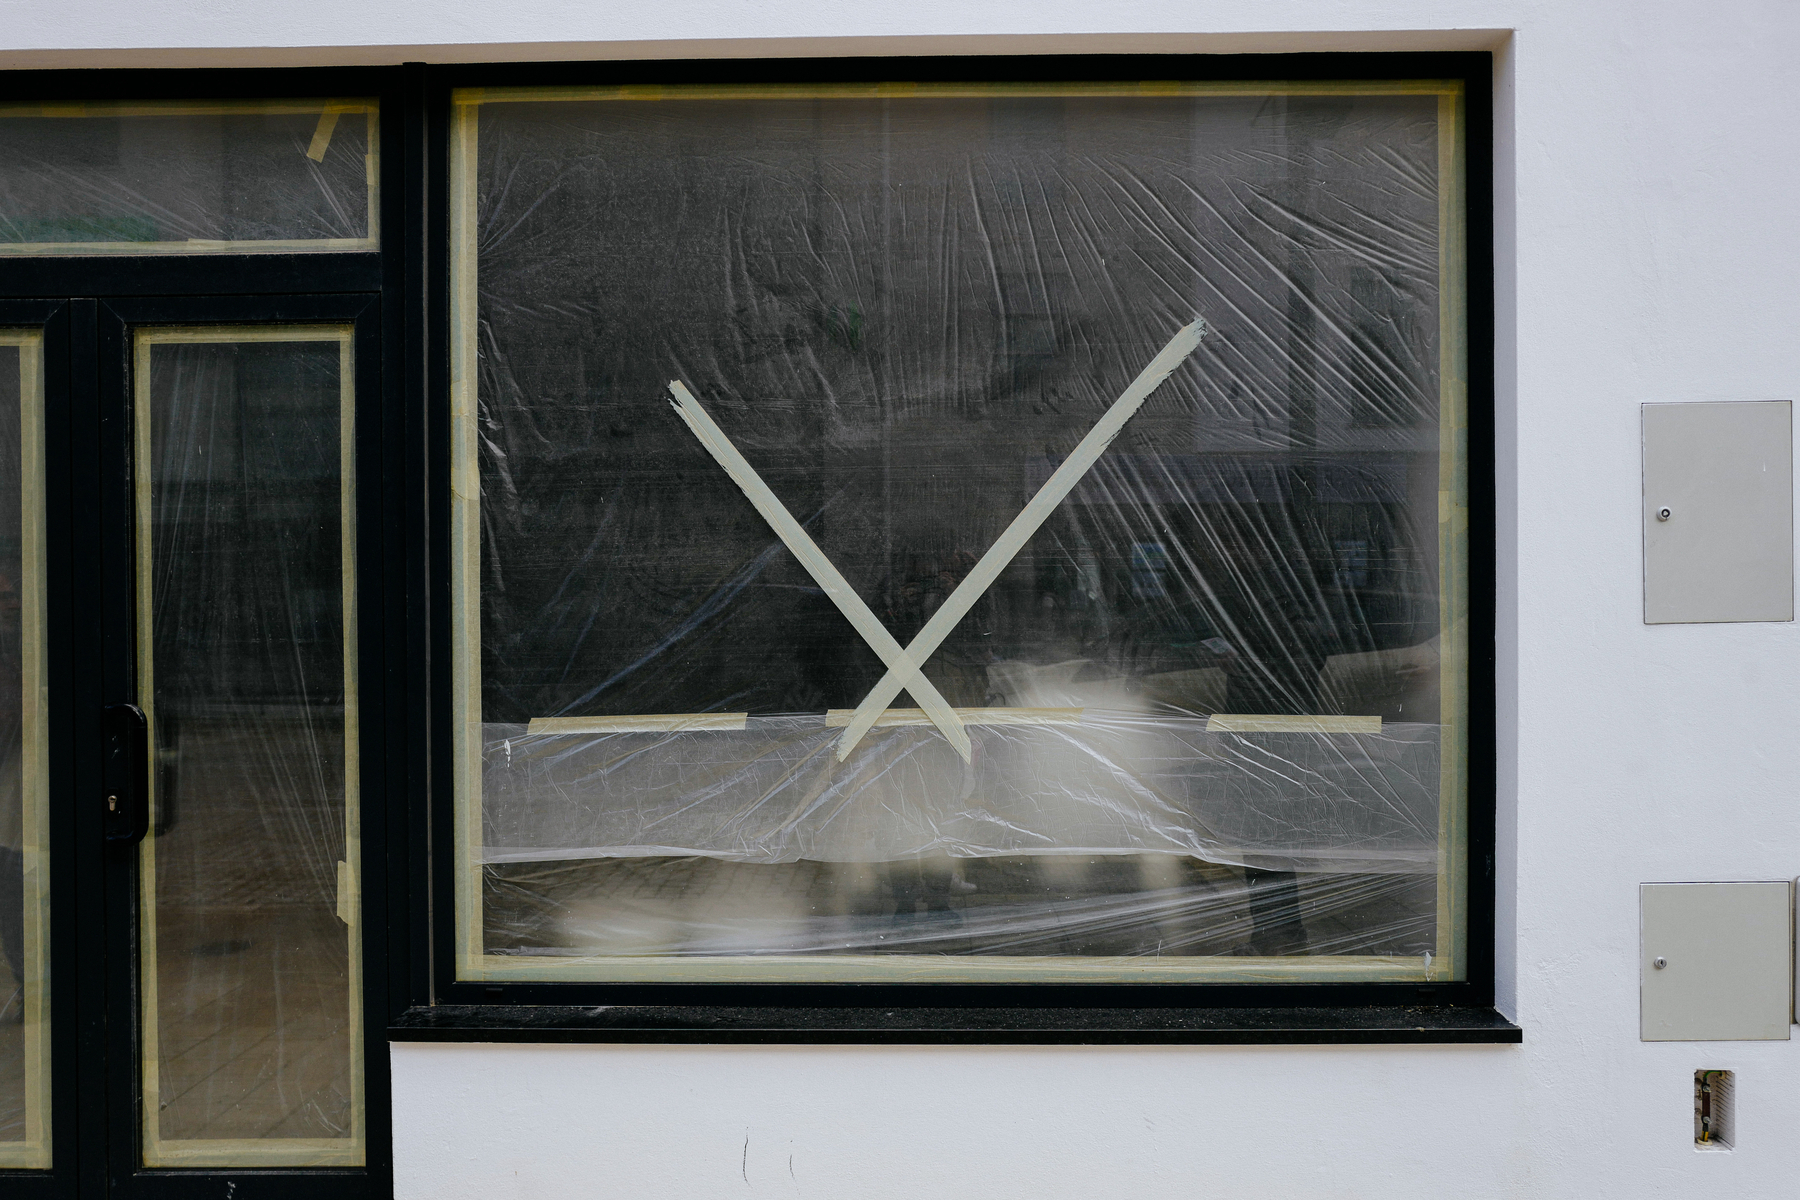 A taped-up window with protective plastic covering, suggesting construction or maintenance, on a building&rsquo;s exterior wall beside a closed door and wall-mounted utility covers.